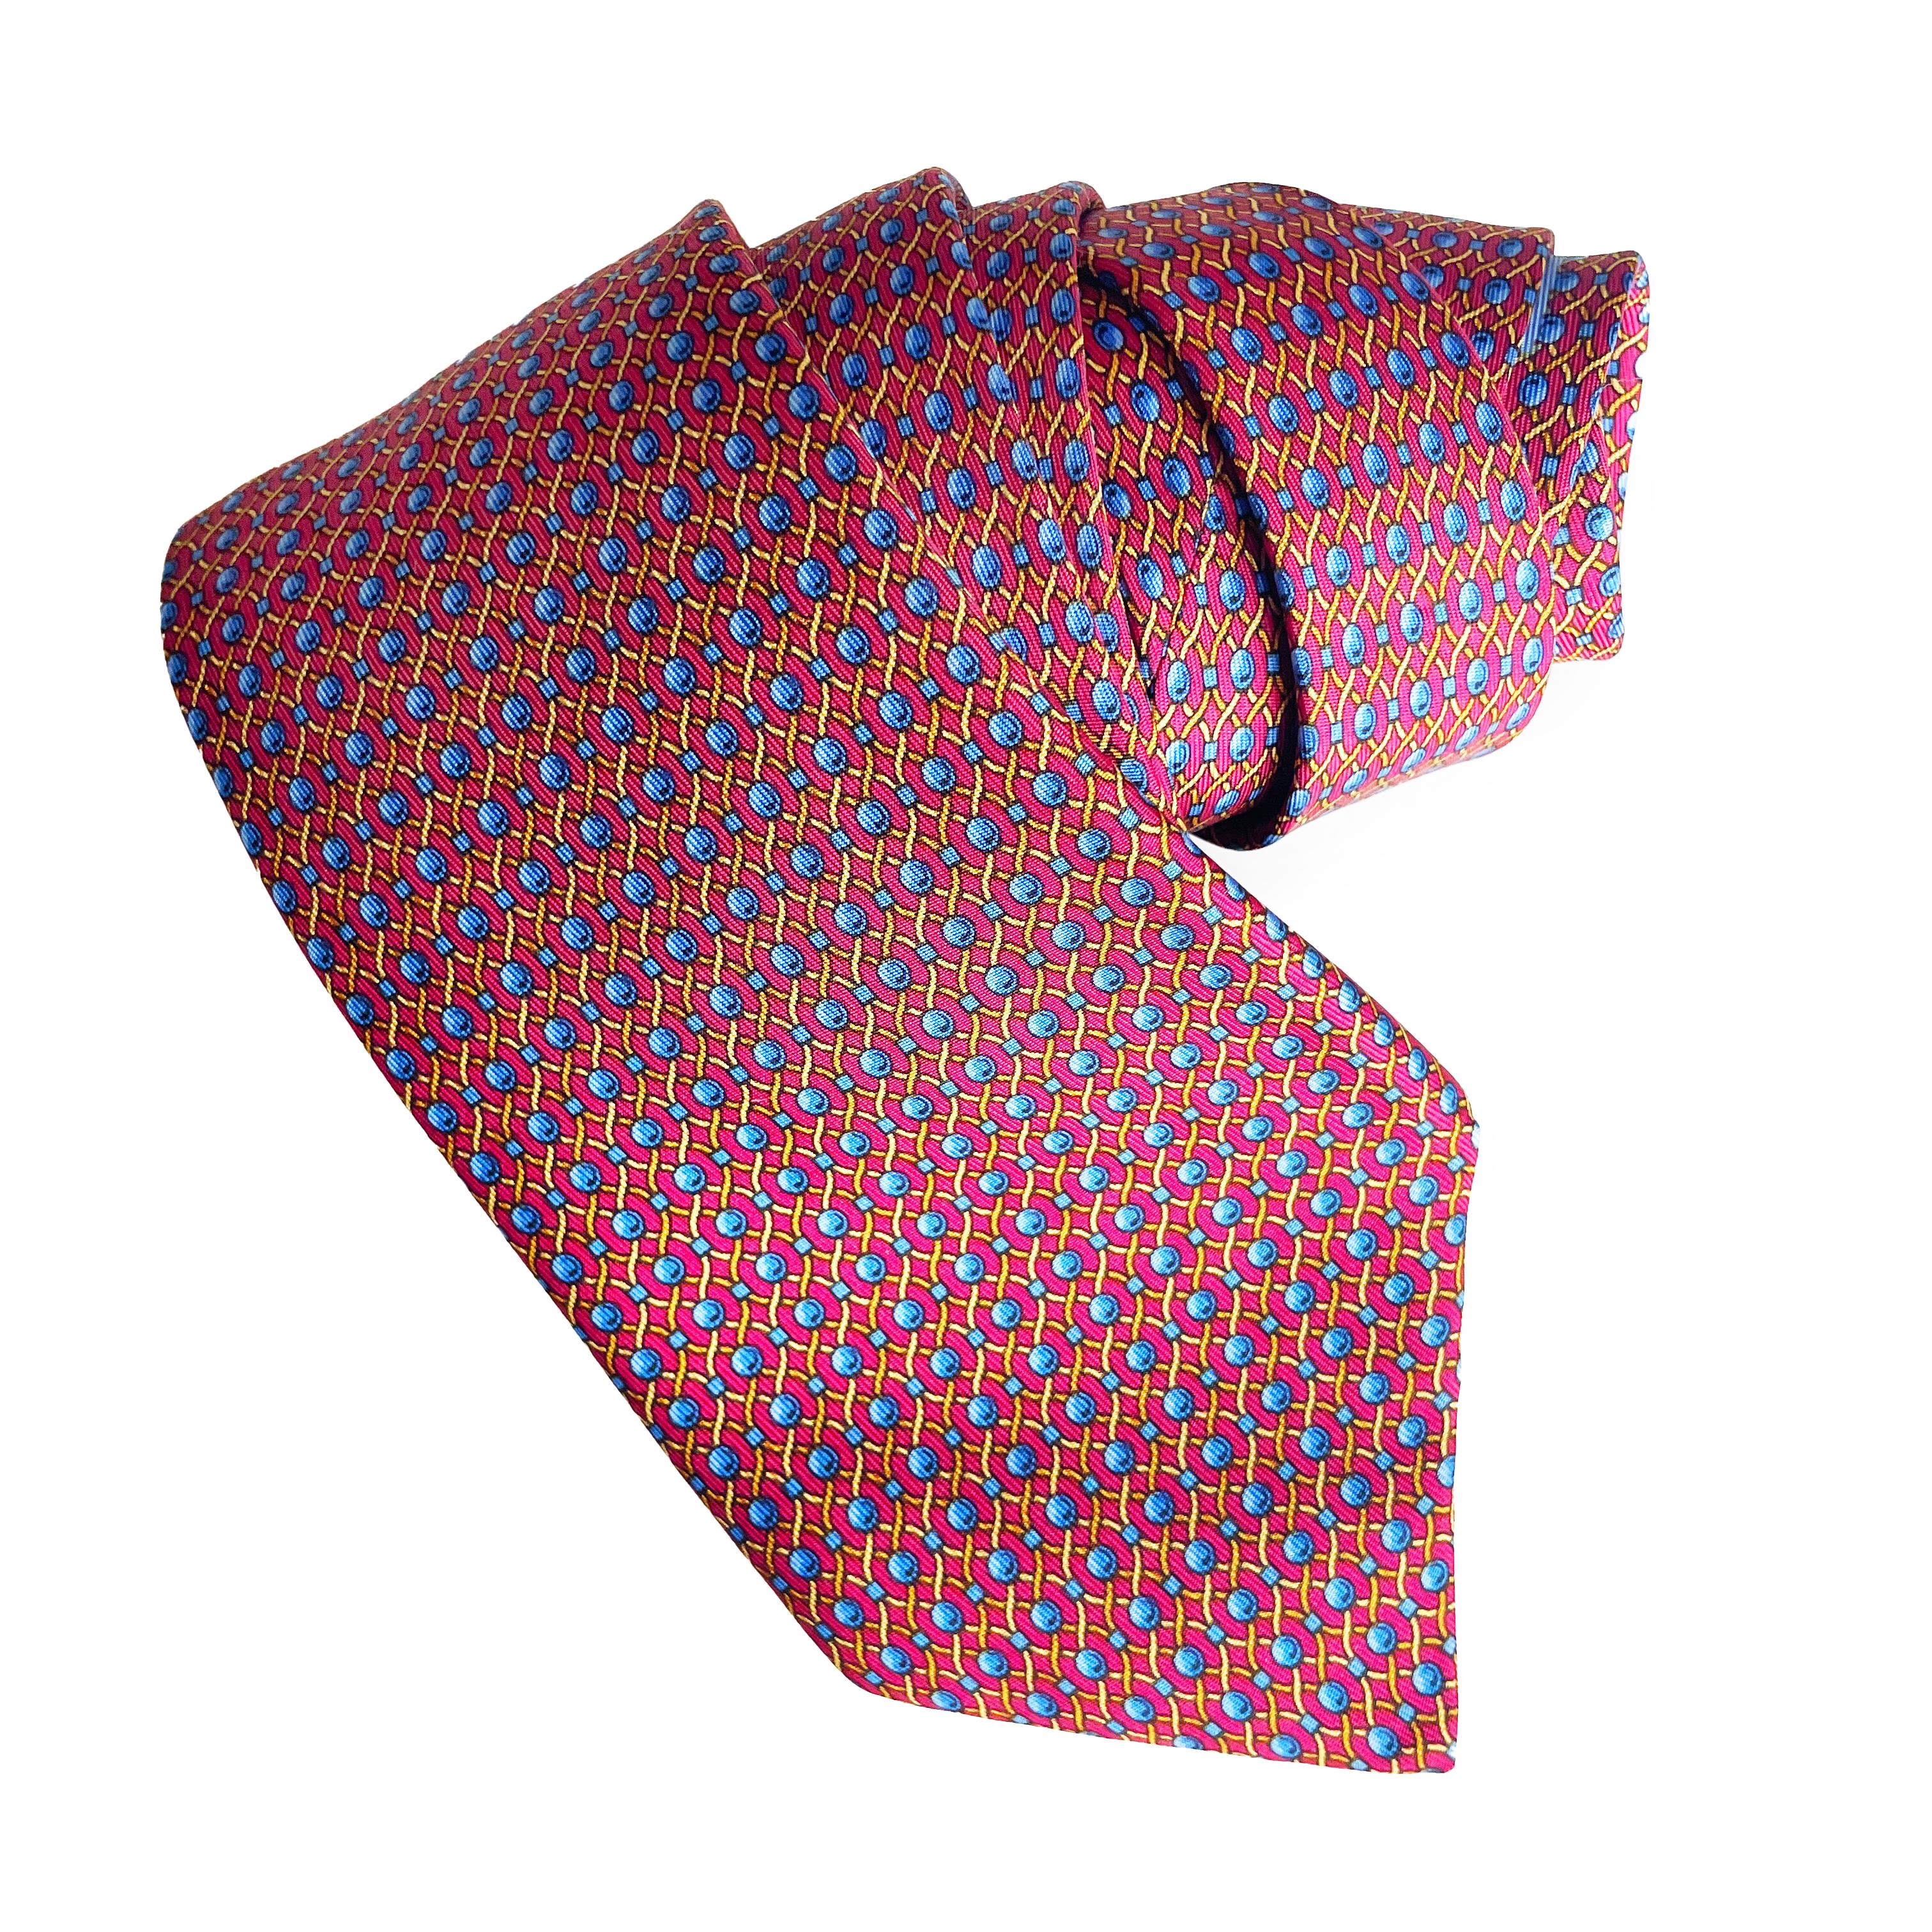 Preowned, vintage Hermes necktie with colorful rope print, likely made in the 90s.  Made from silk, it features an abstract rope and ball pattern throughout.

Perfect for those of you who enjoy luxury accessories - or for those who collect.  The